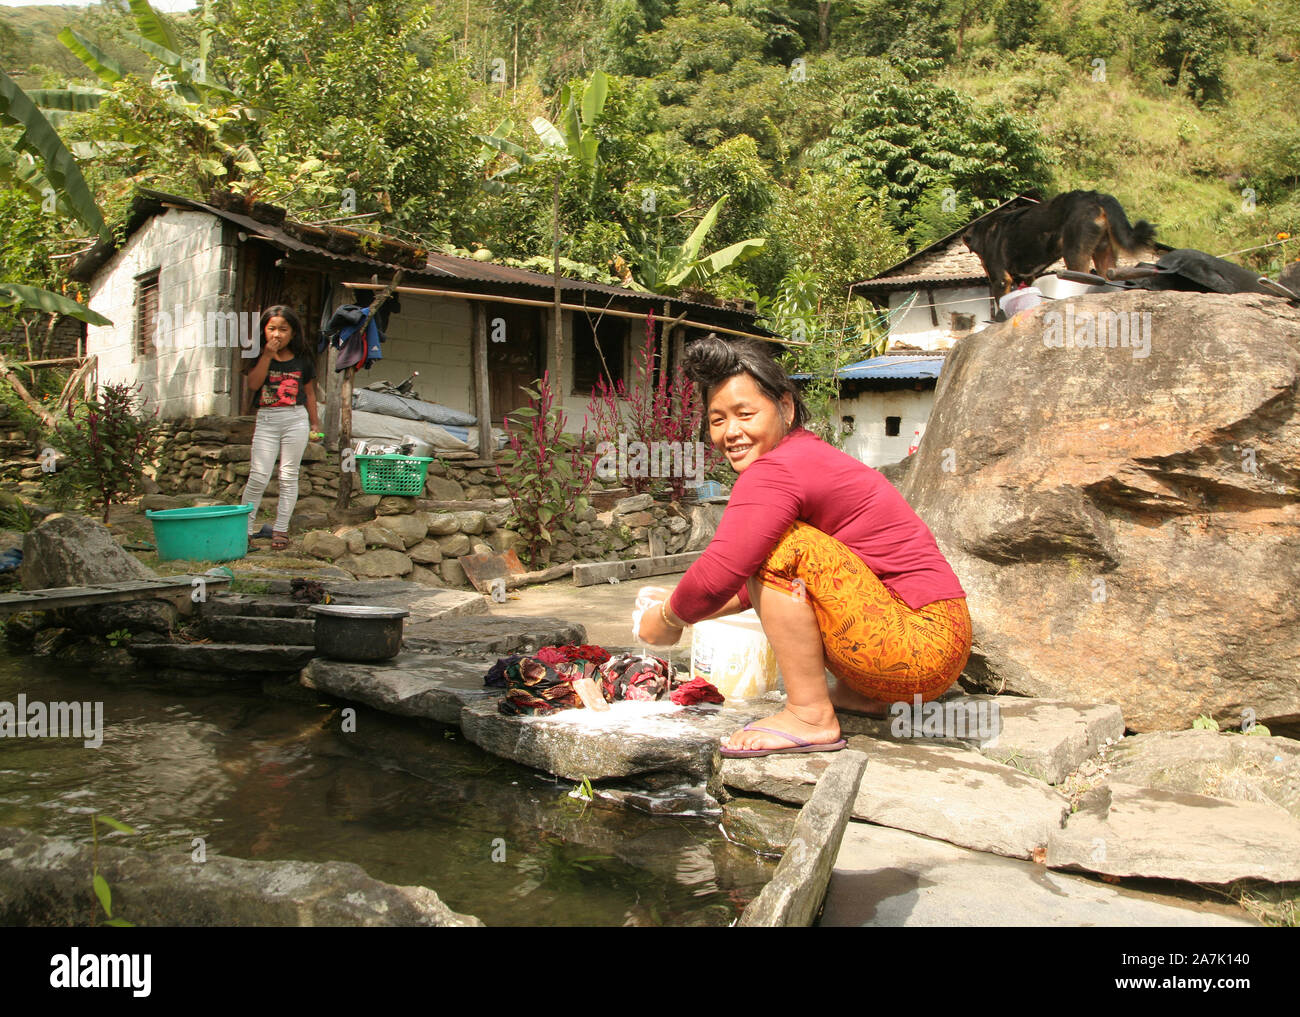 A Gurung woman washes clothes in a stream near her home, Sikles region, Nepal. Stock Photo